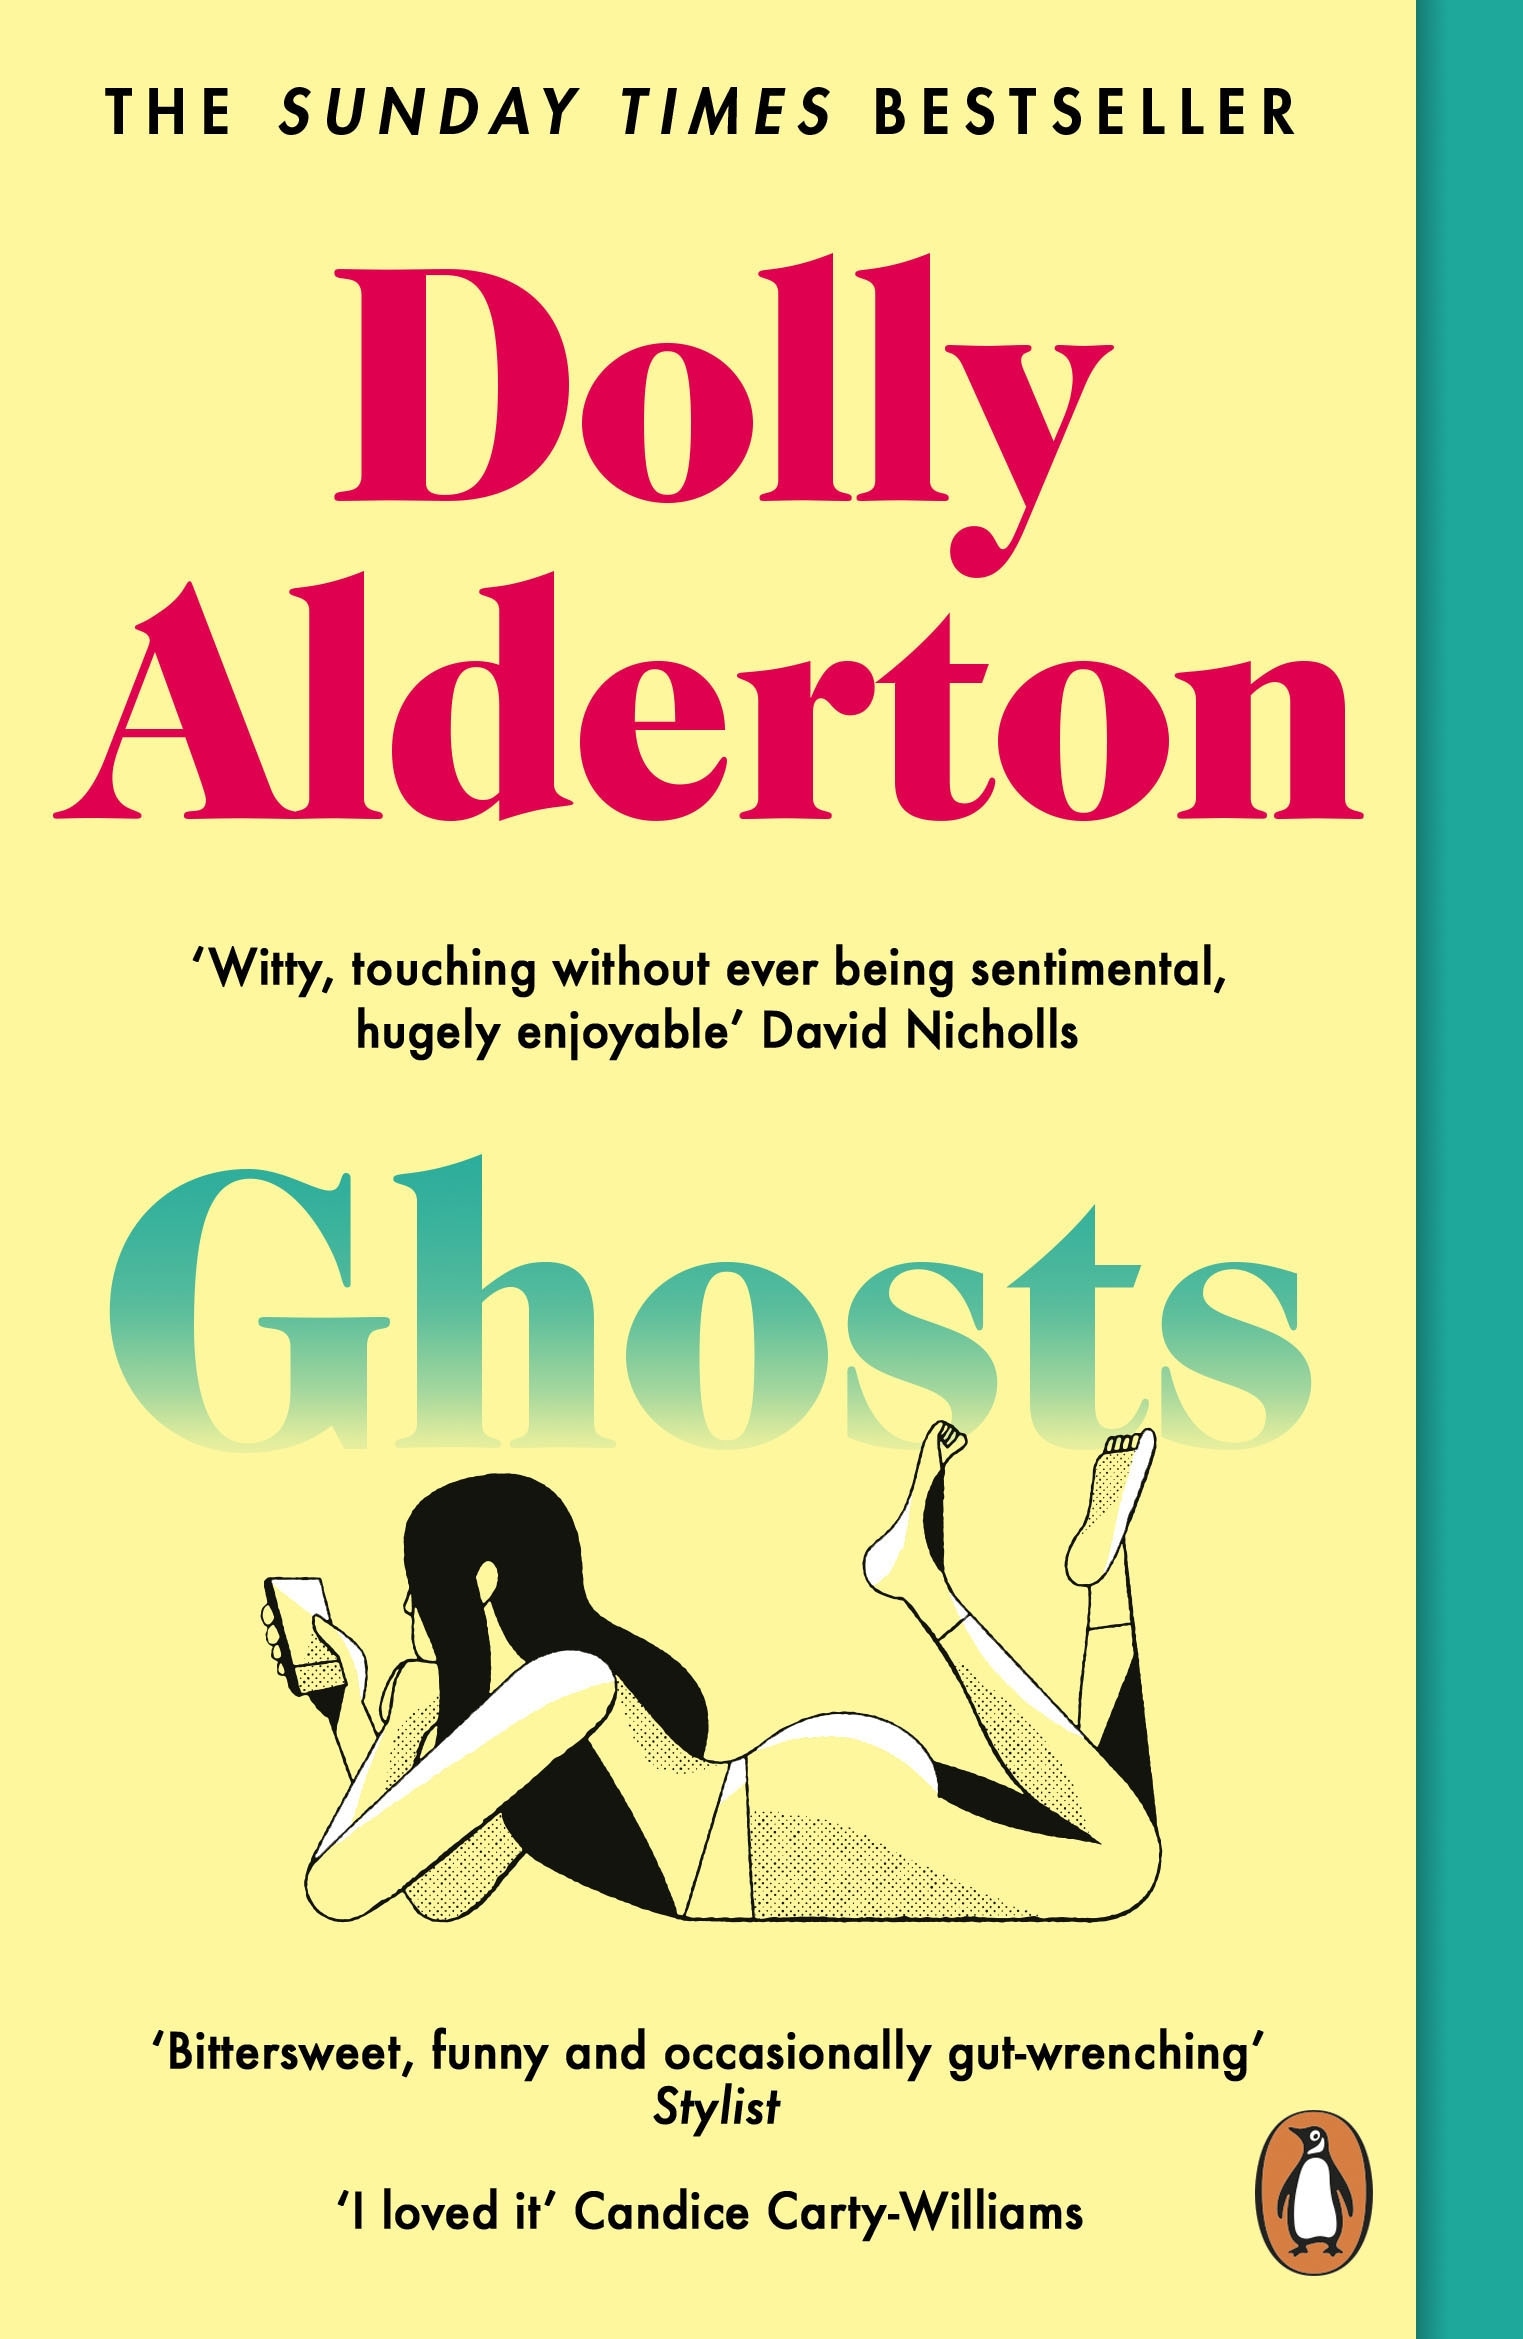 Book “Ghosts” by Dolly Alderton — July 22, 2021